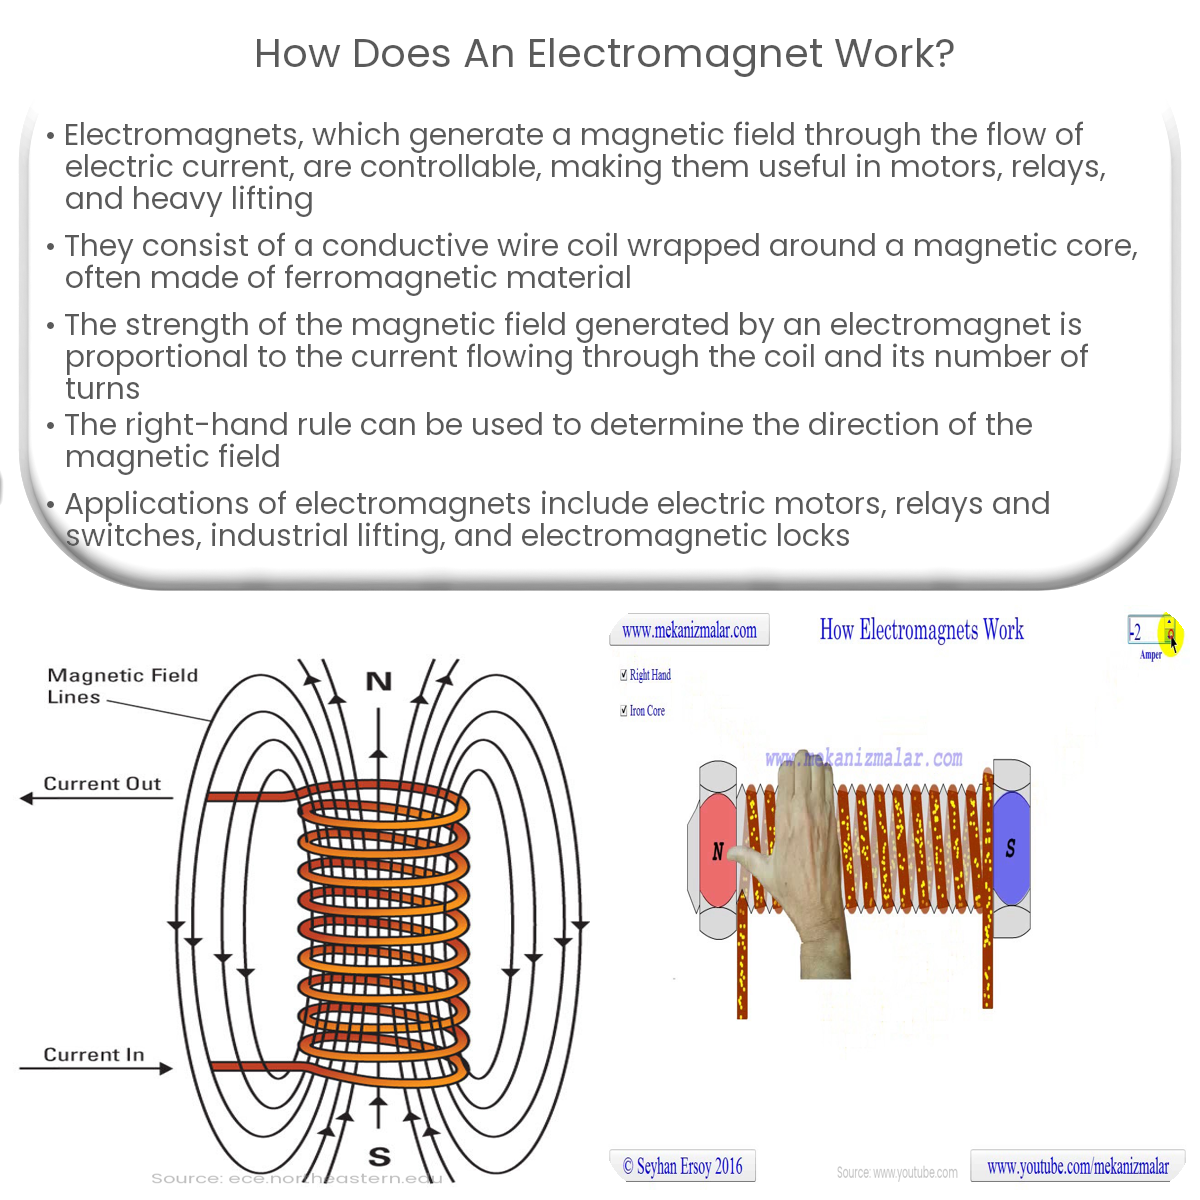 How does an electromagnet work?